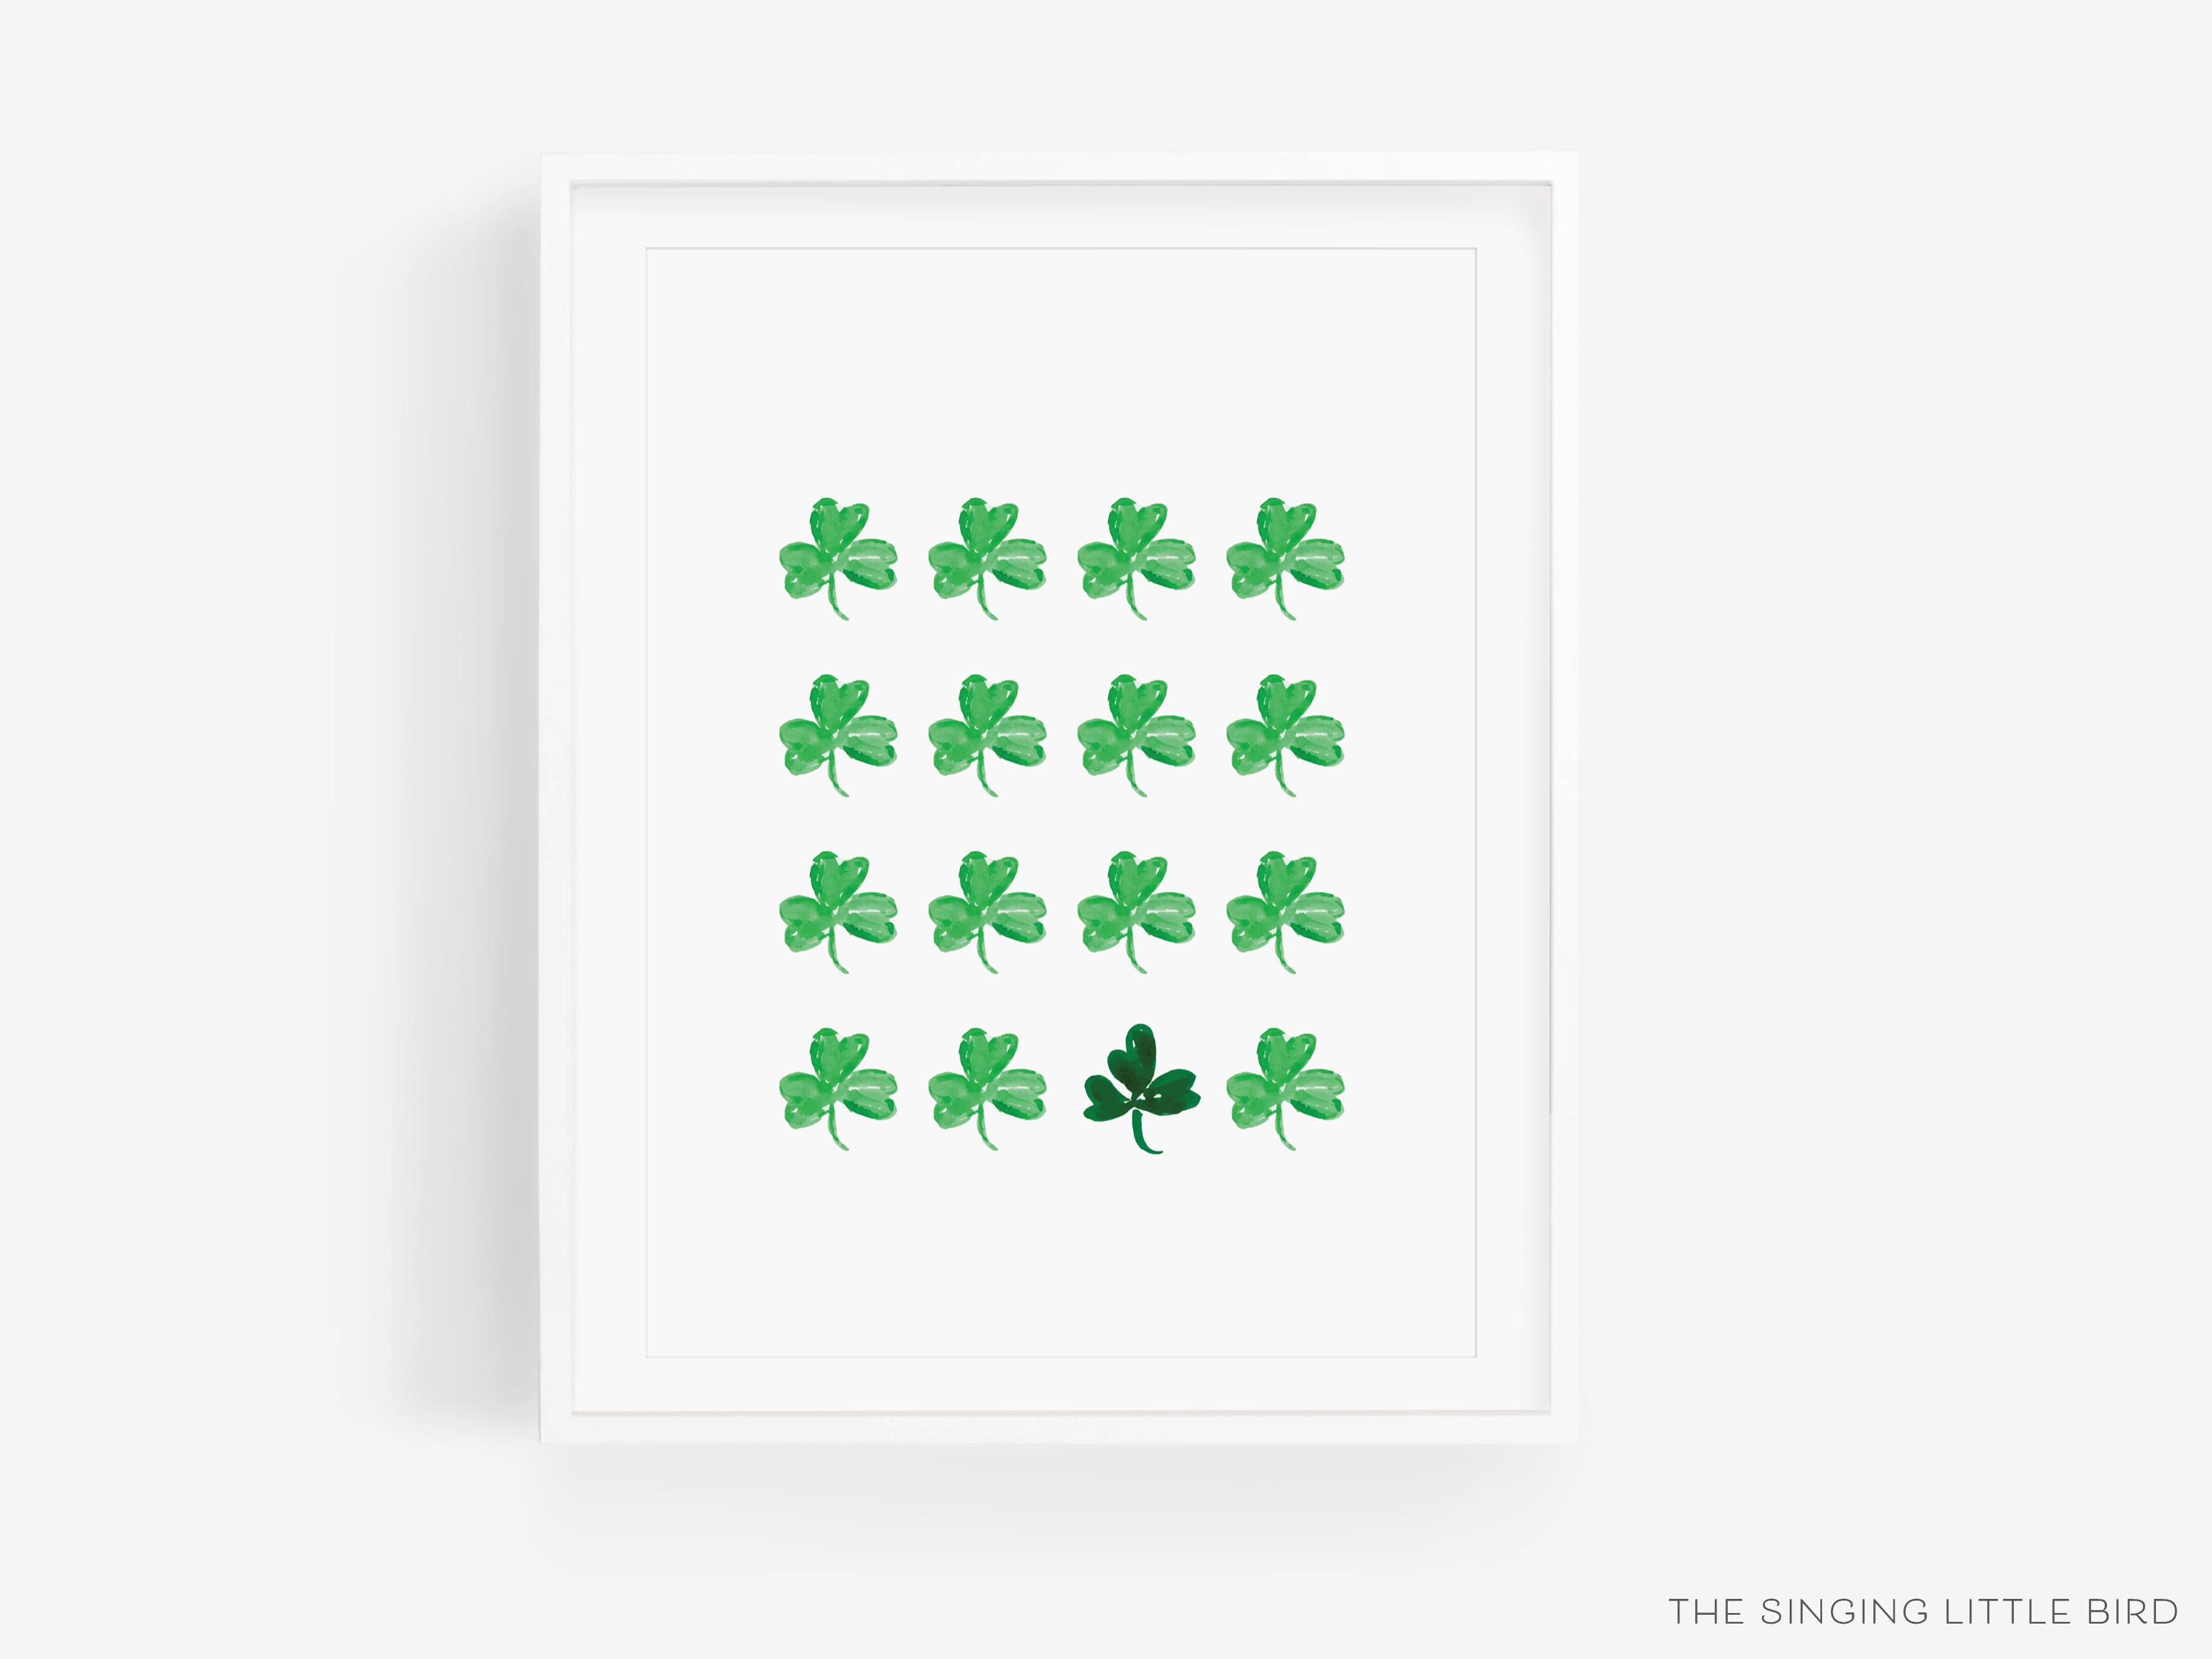 Multi Green Shamrock Art Print-This watercolor art print features our hand-painted Shamrocks, printed in the USA on 120lb high quality art paper. This makes a great gift or wall decor for the lucky charm lover in your life.-The Singing Little Bird